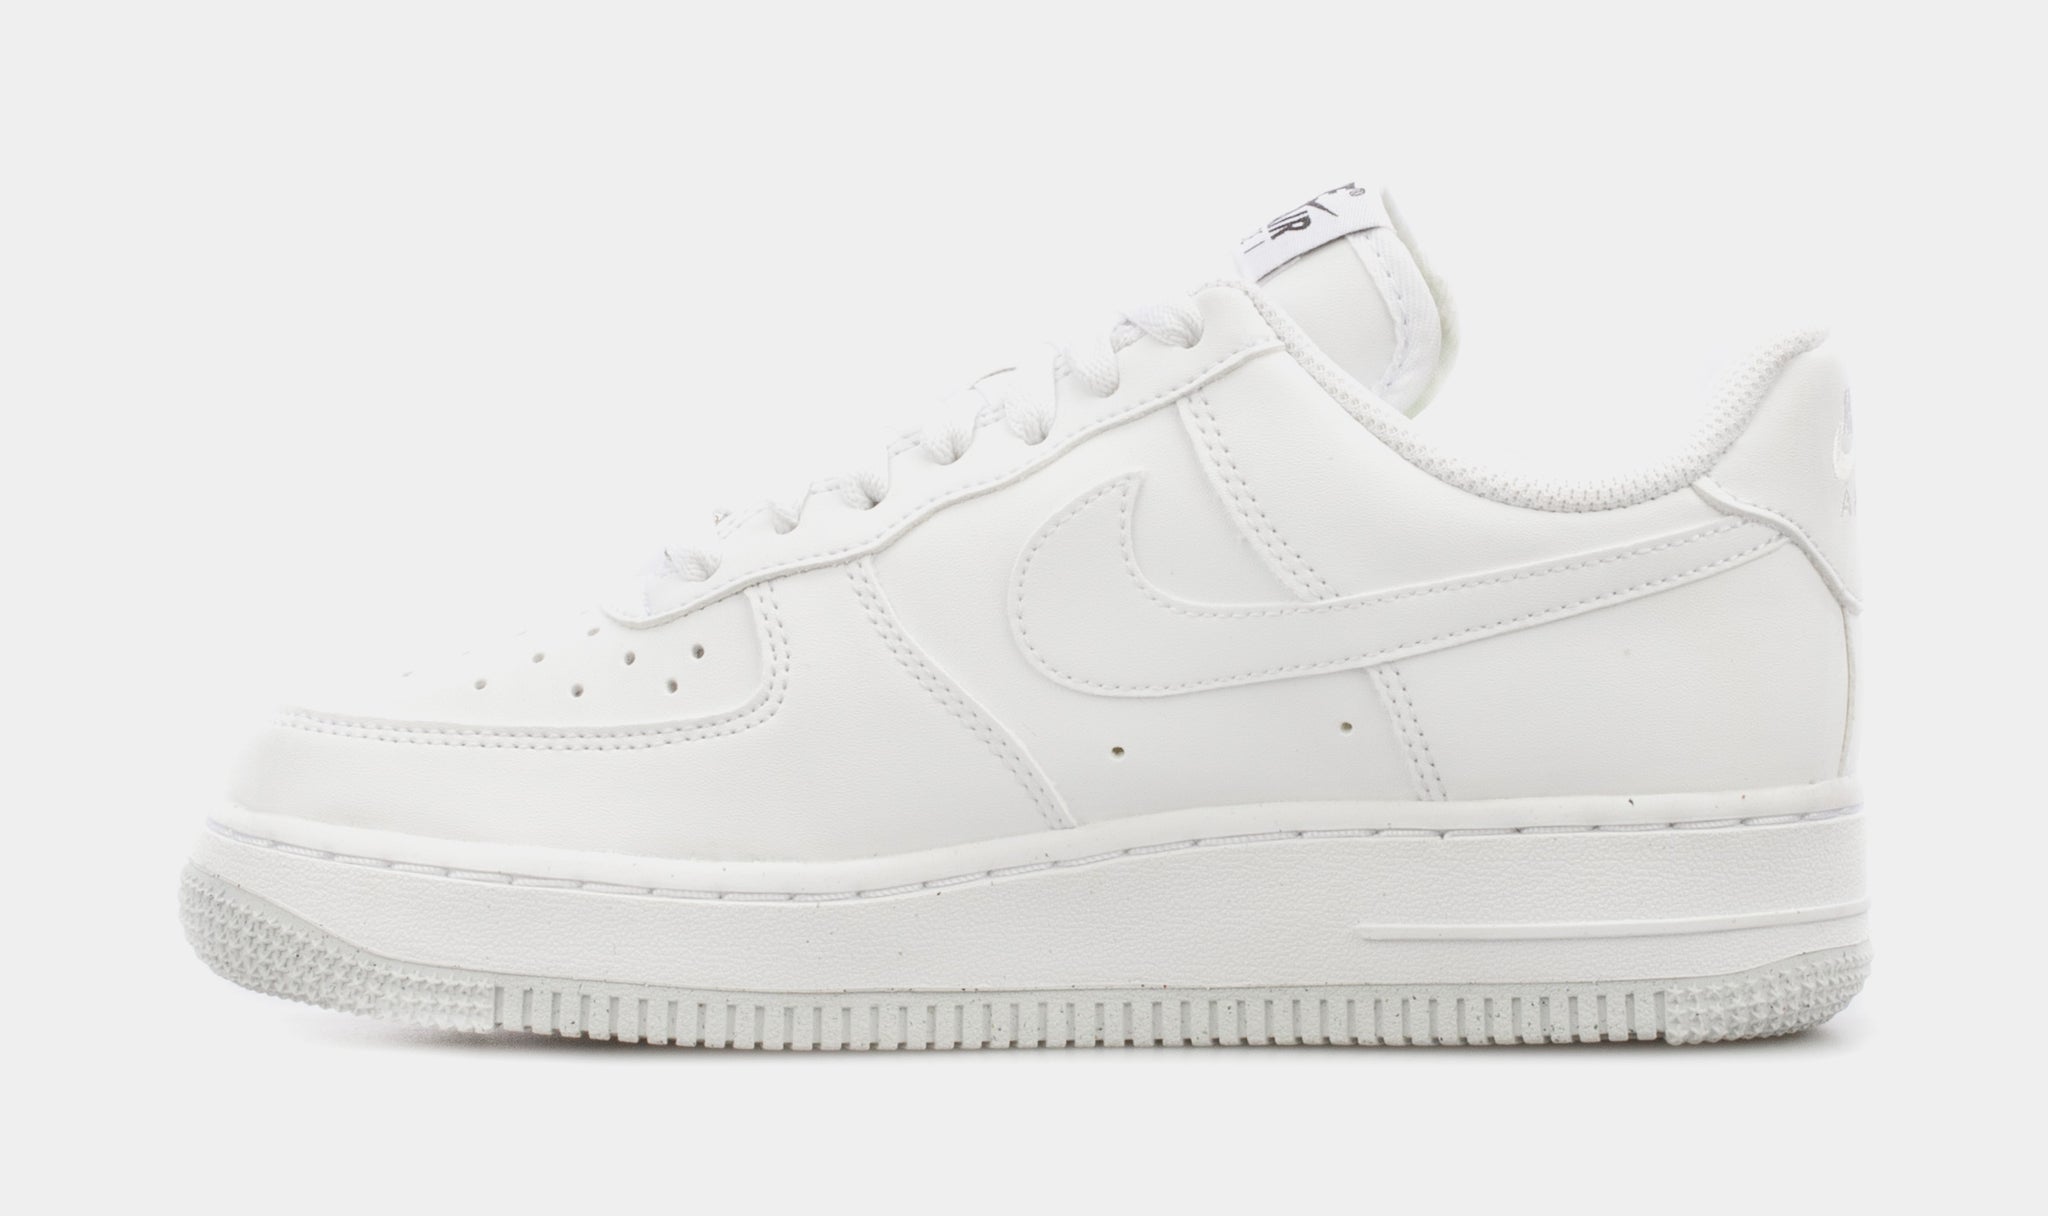 Womens Air Force 1 Shoes.